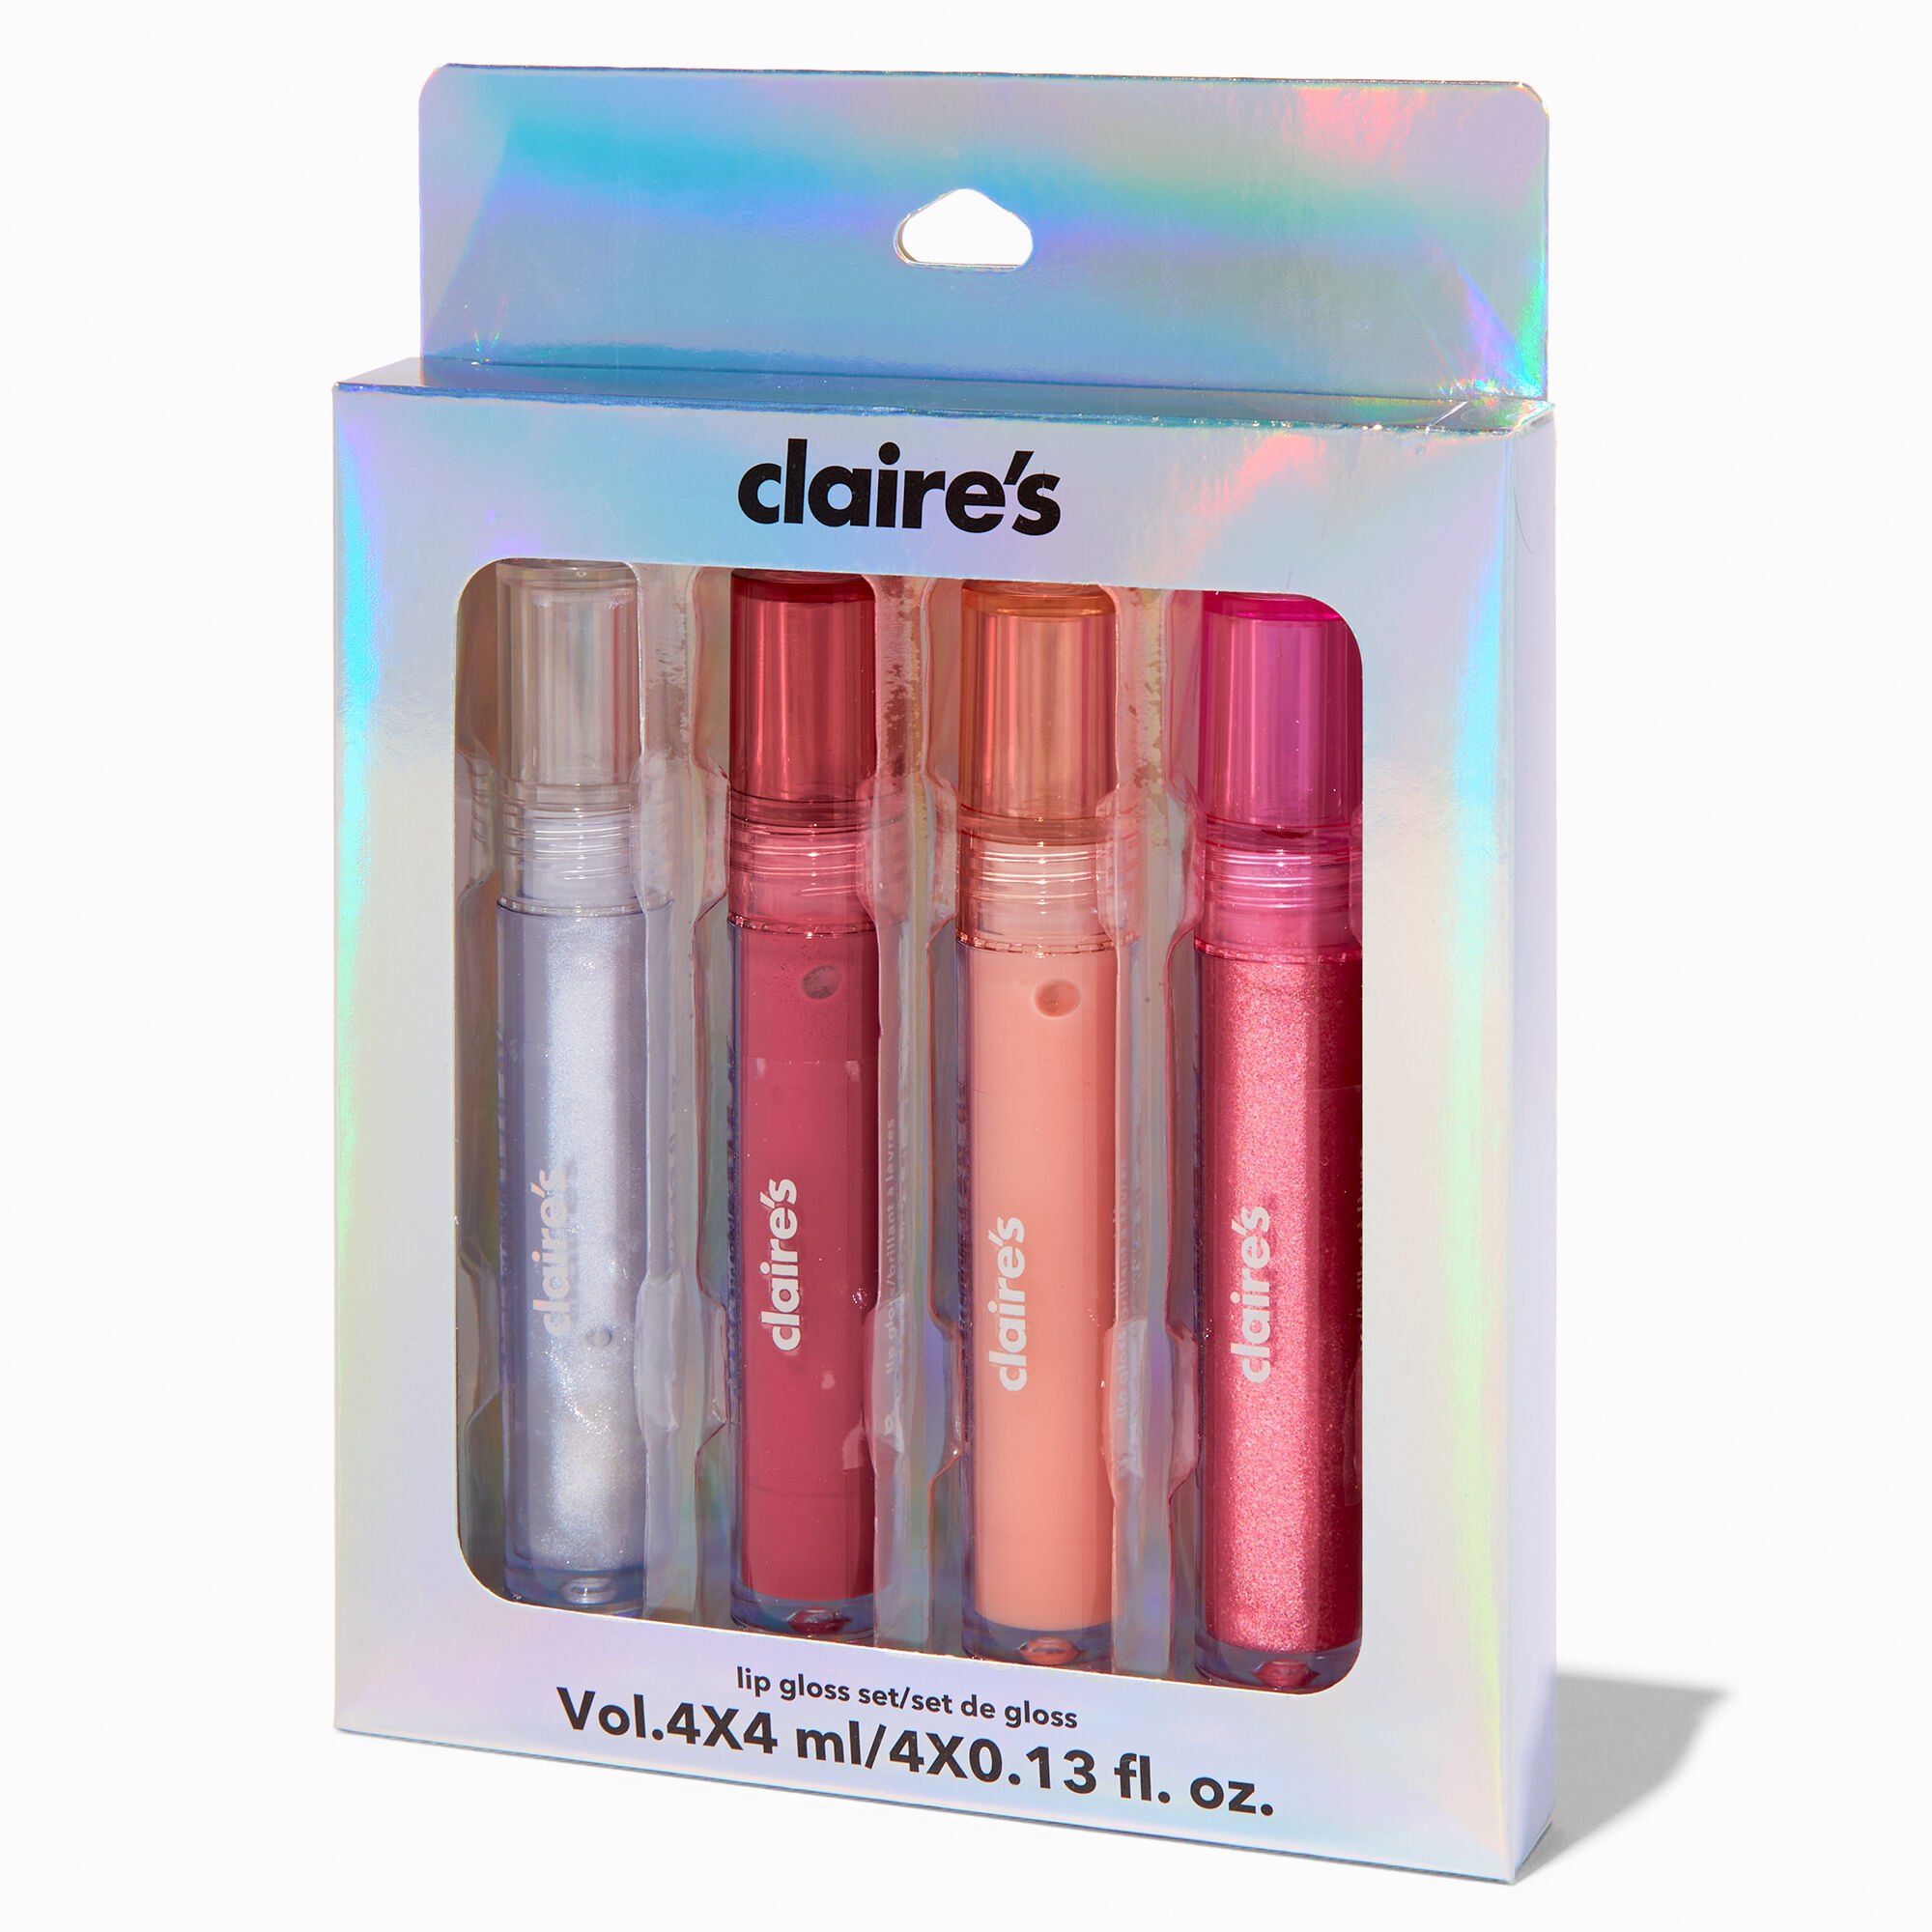 View Claires Monochromatic Lip Gloss Wand Set 4 Pack Pink information